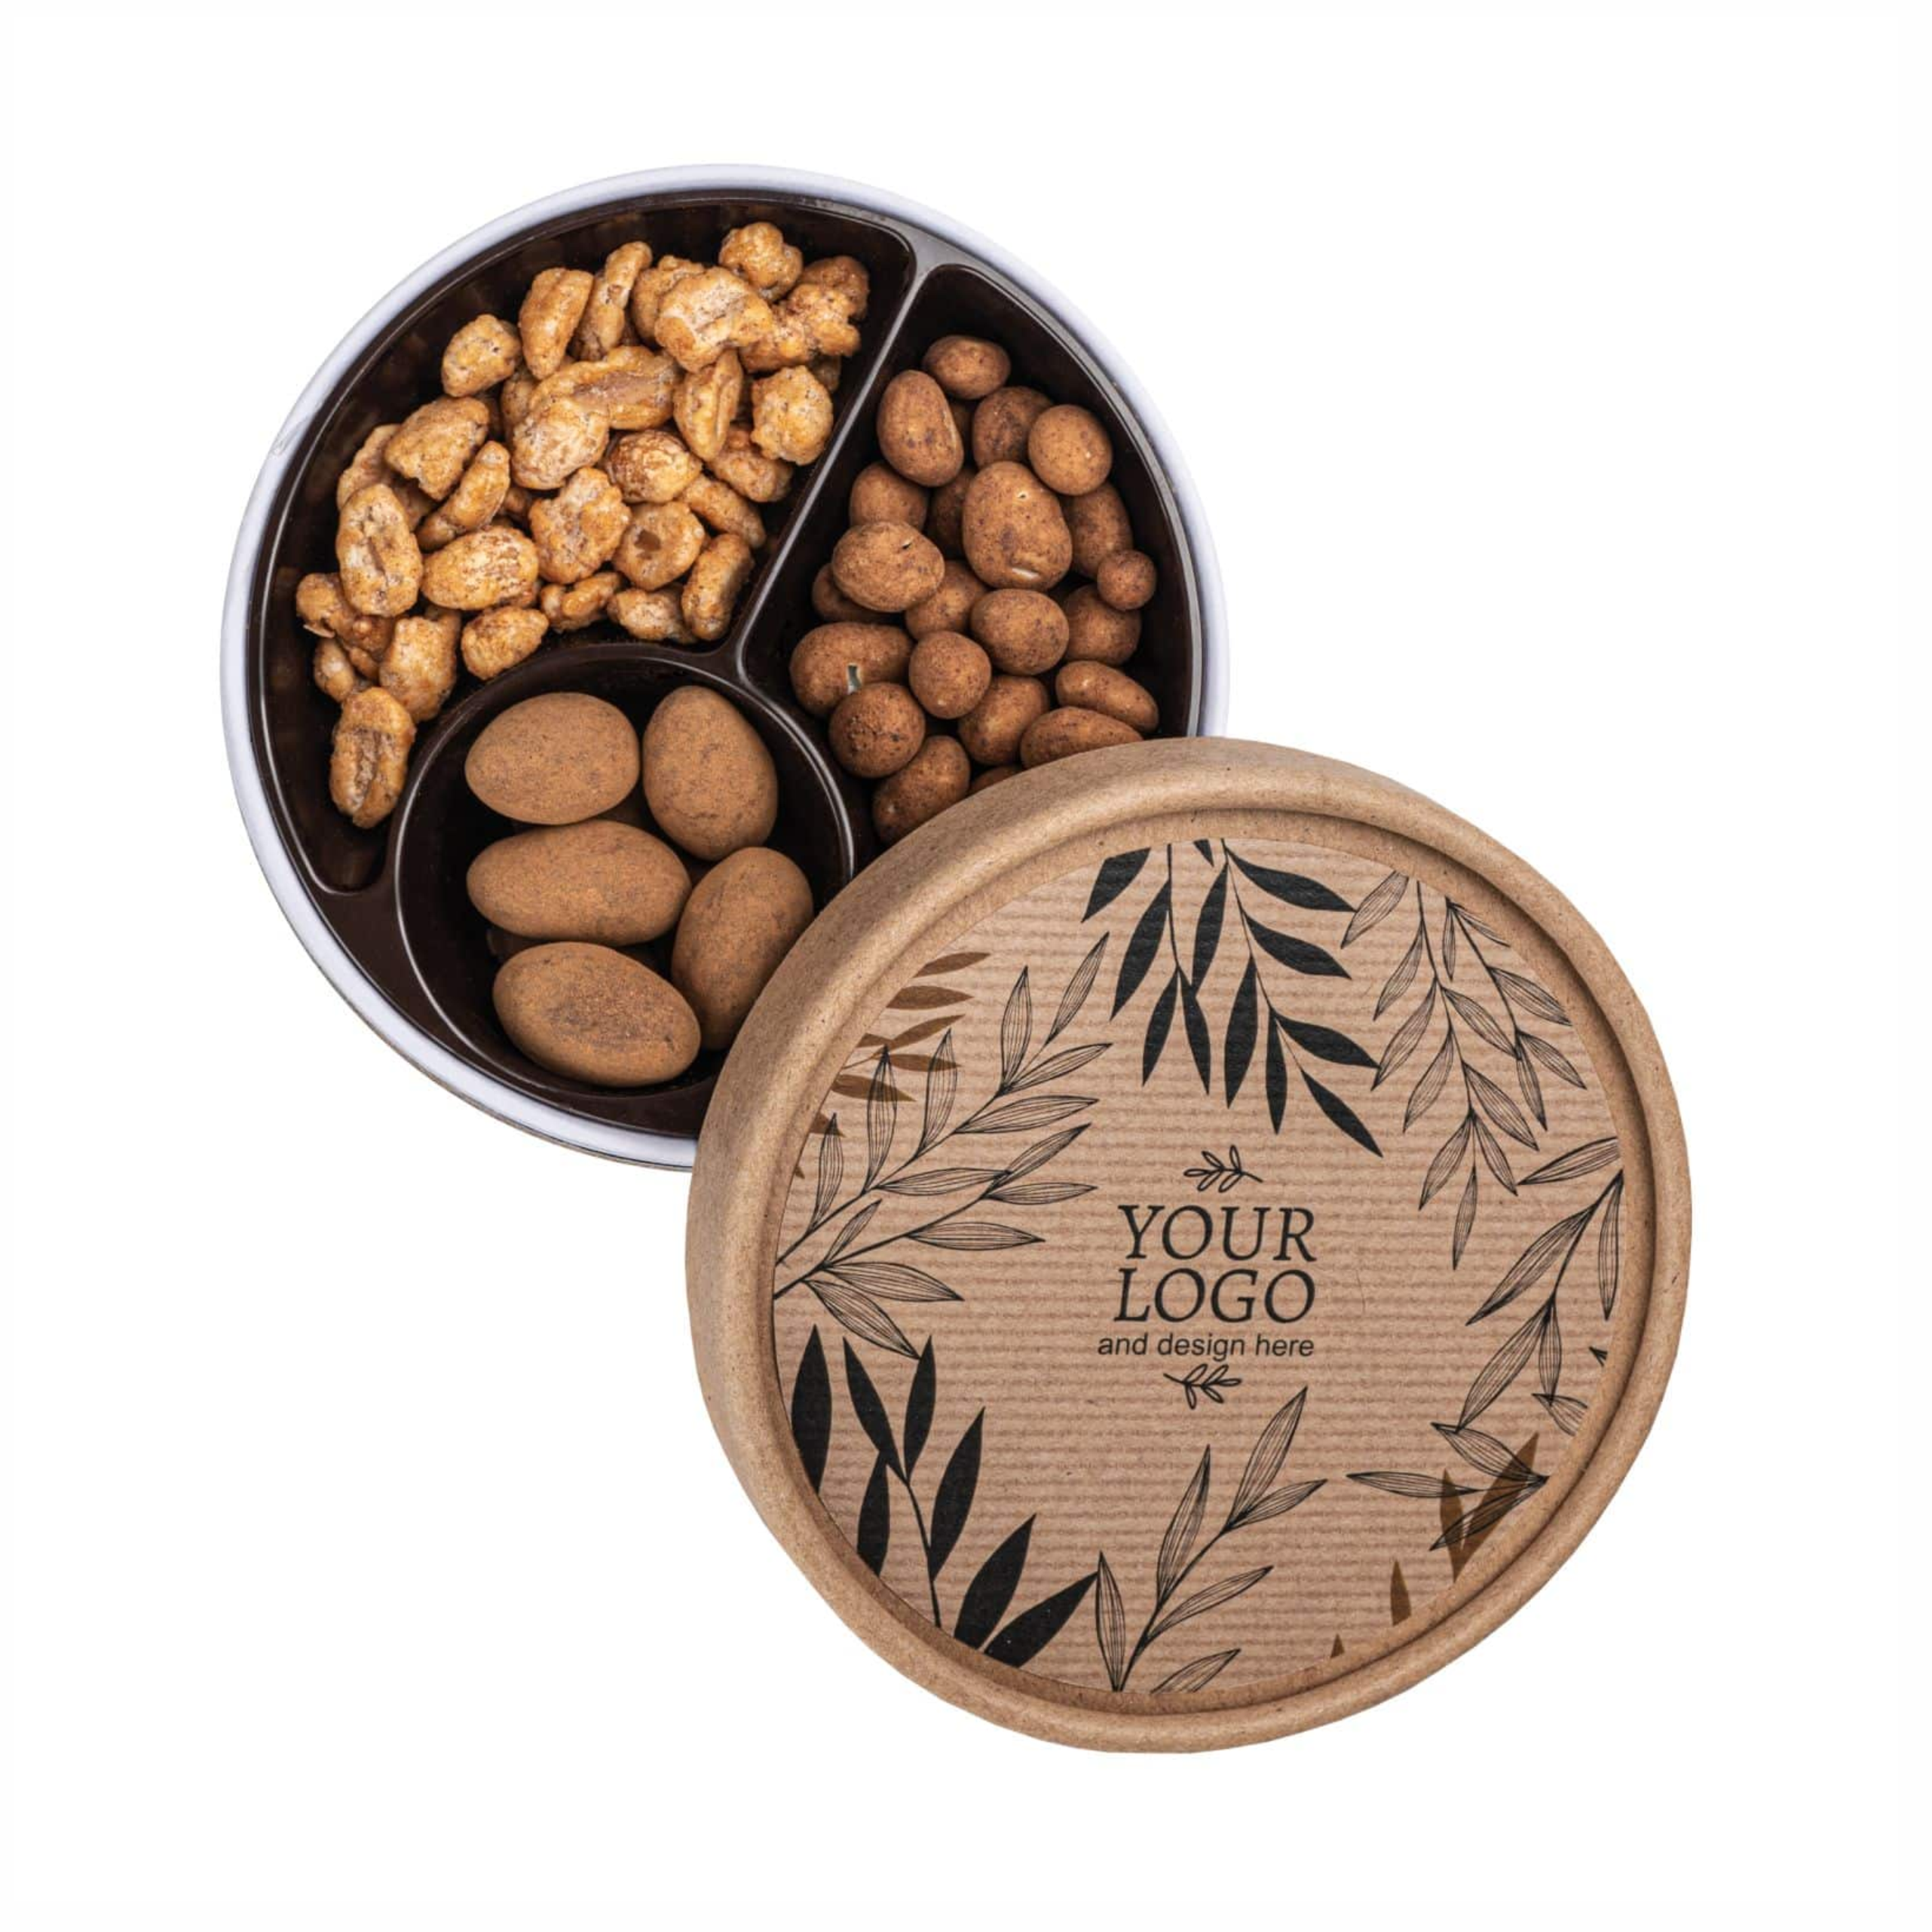 set of berries and nuts trio with logo